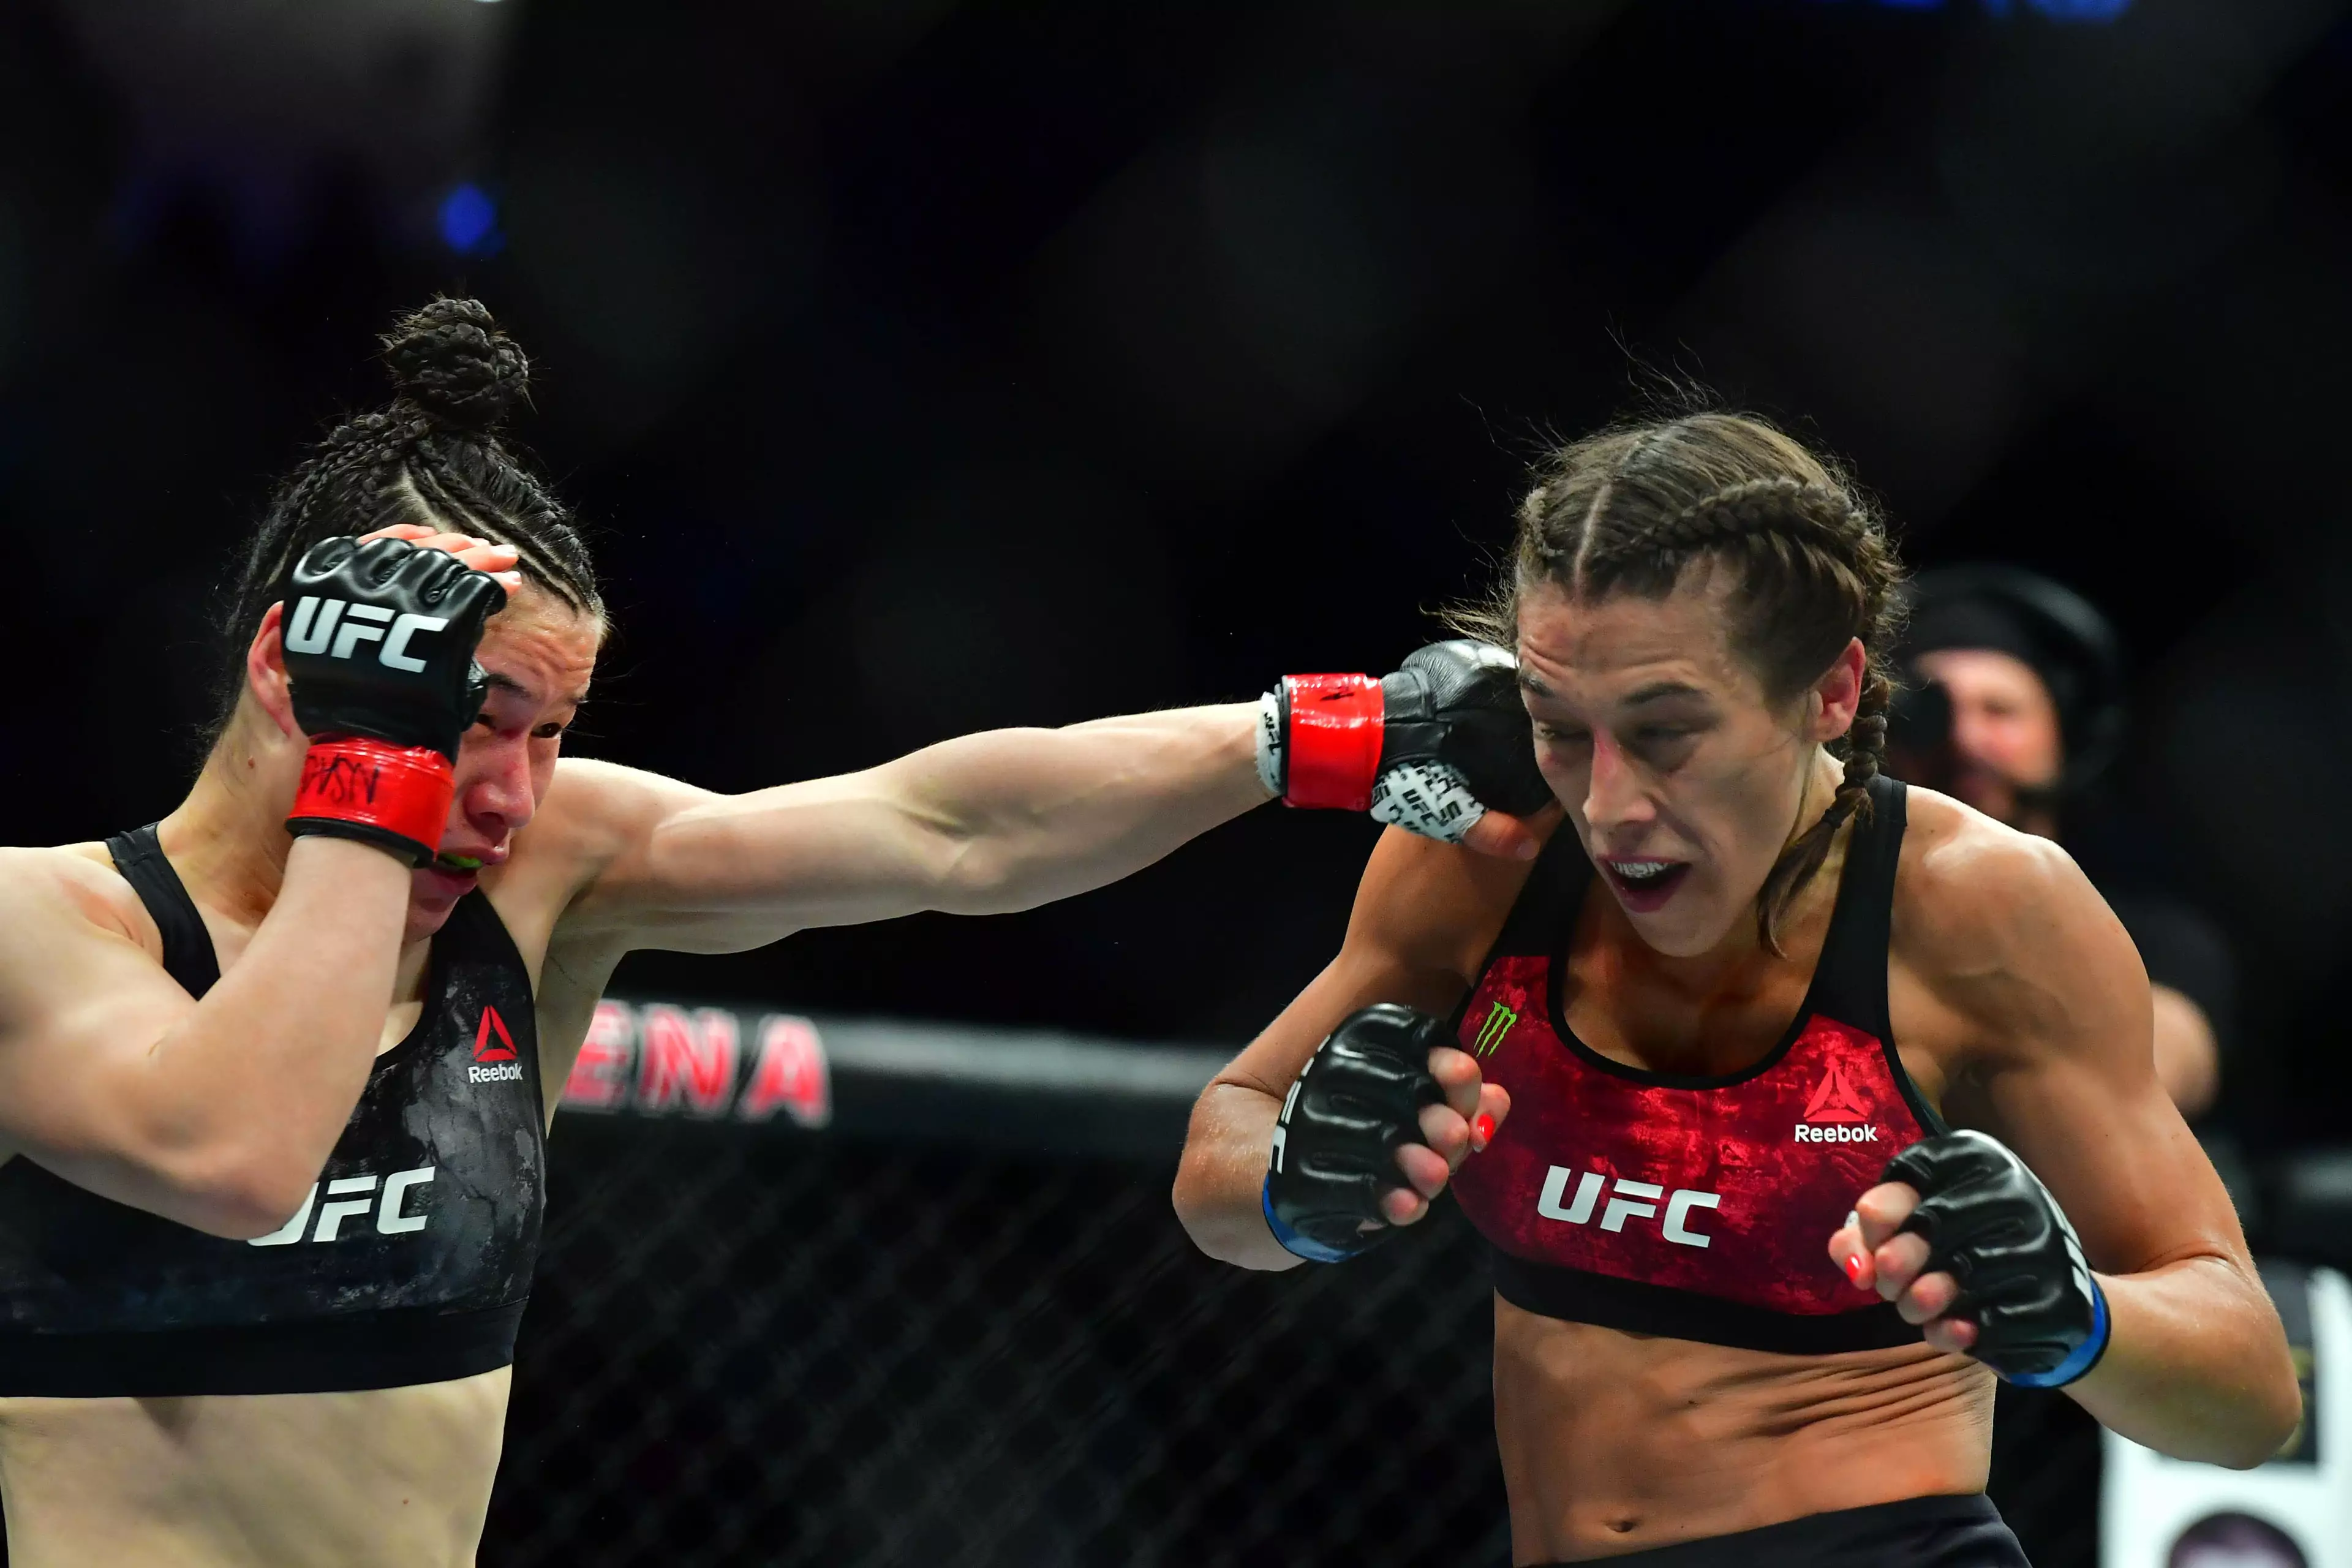 Joanna Jedrzejczyk suffered some horrific injuries during her recent UFC bout.